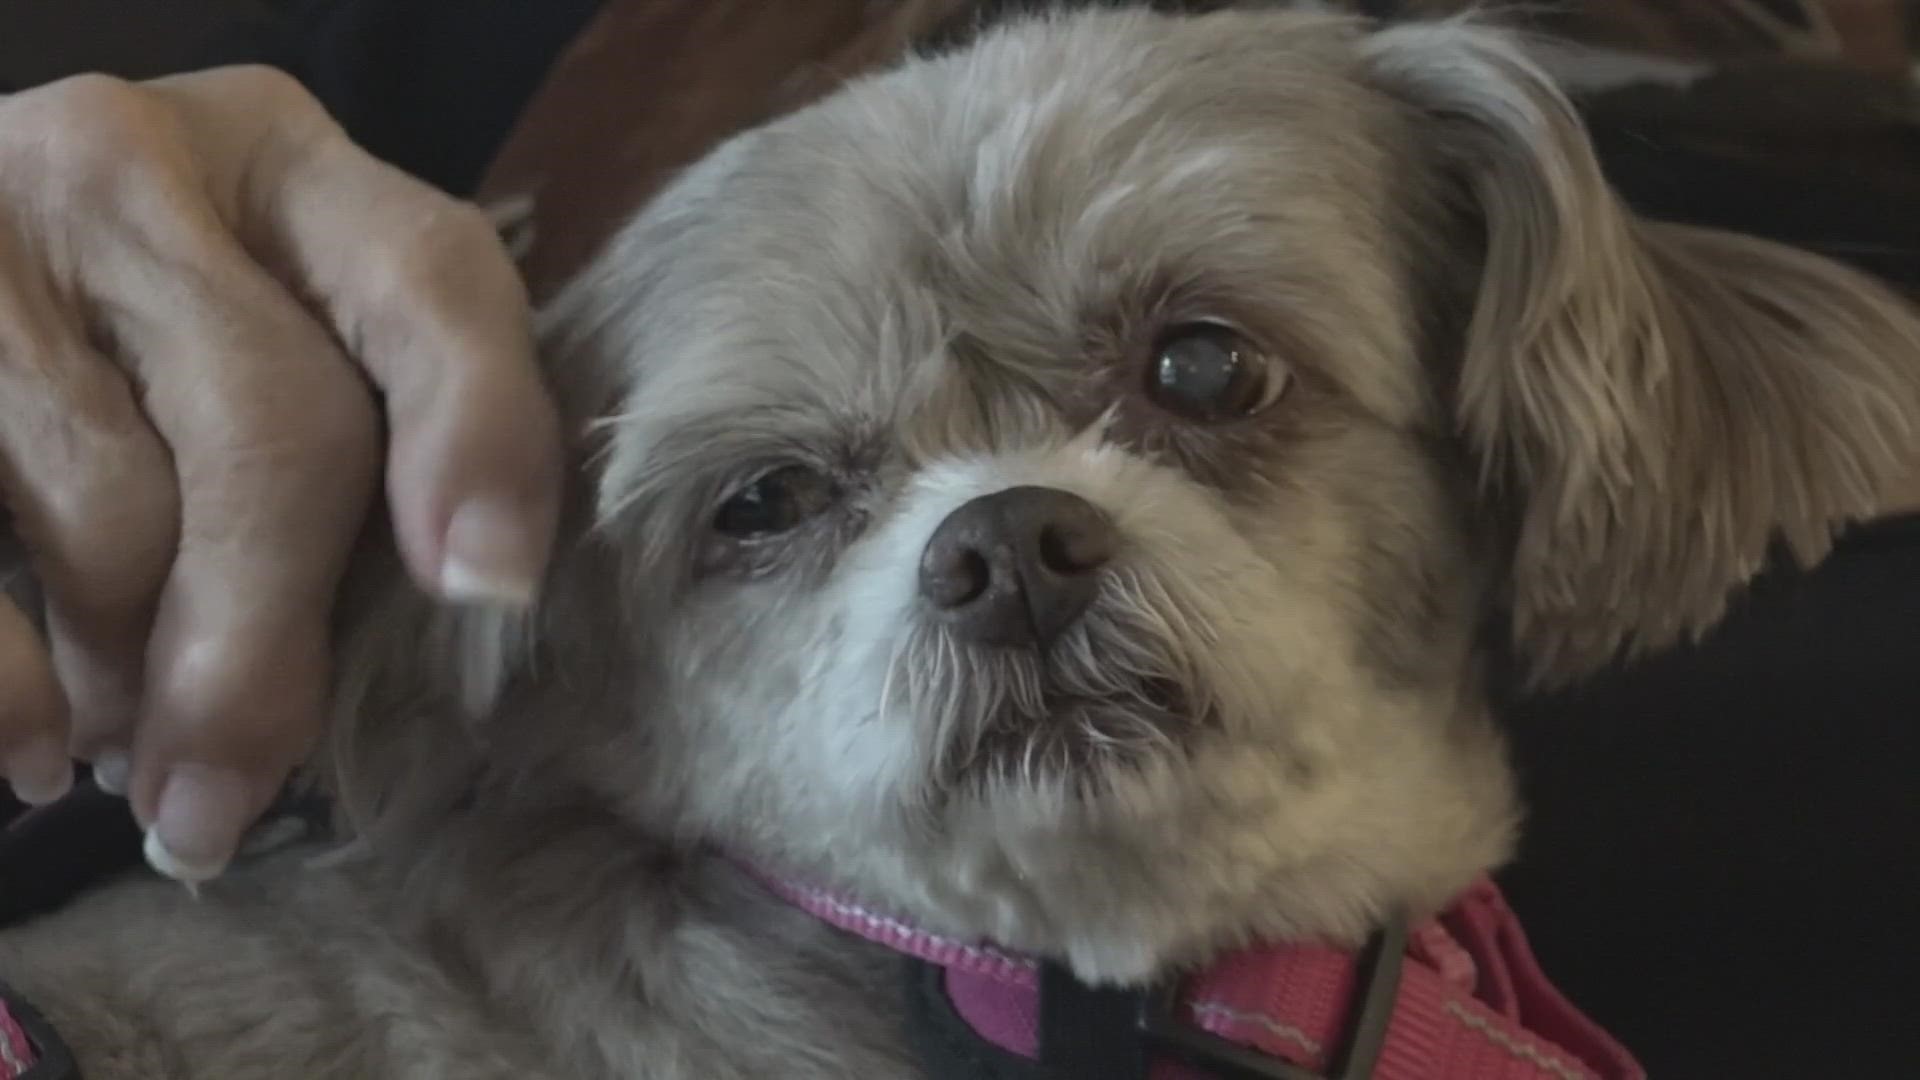 A group is pairing senior citizens with senior dogs because both need love. The group is expanding and looking for more volunteers and forever homes.